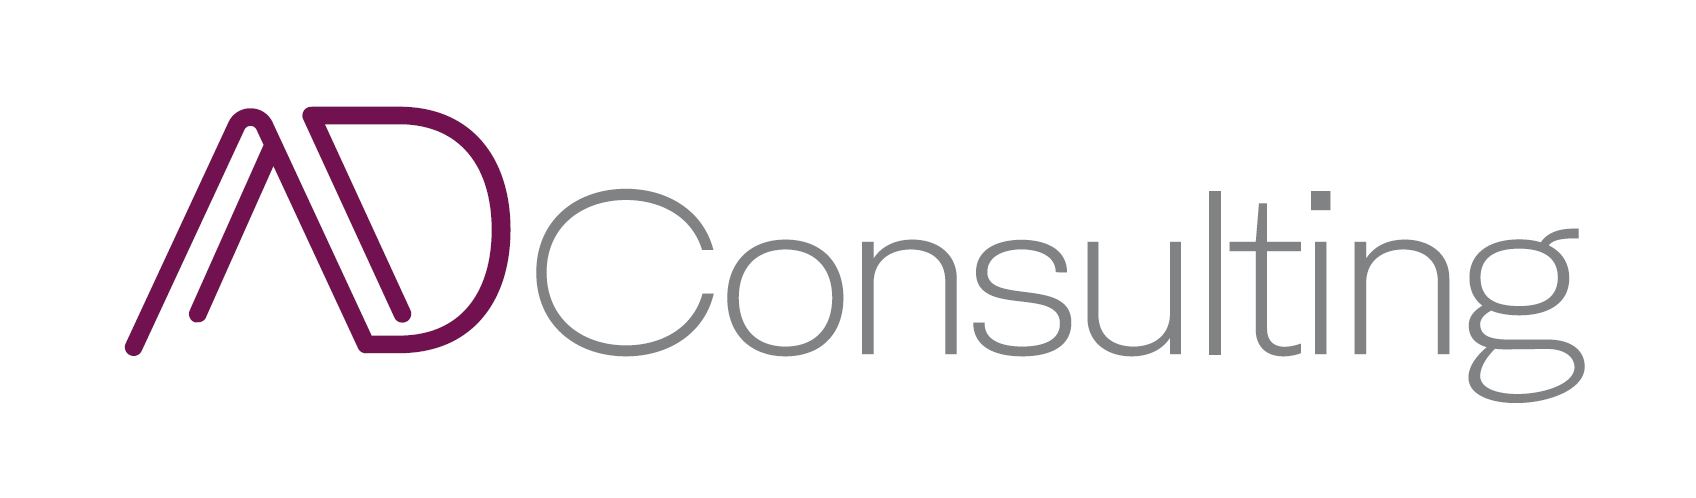 AD Consulting Srl